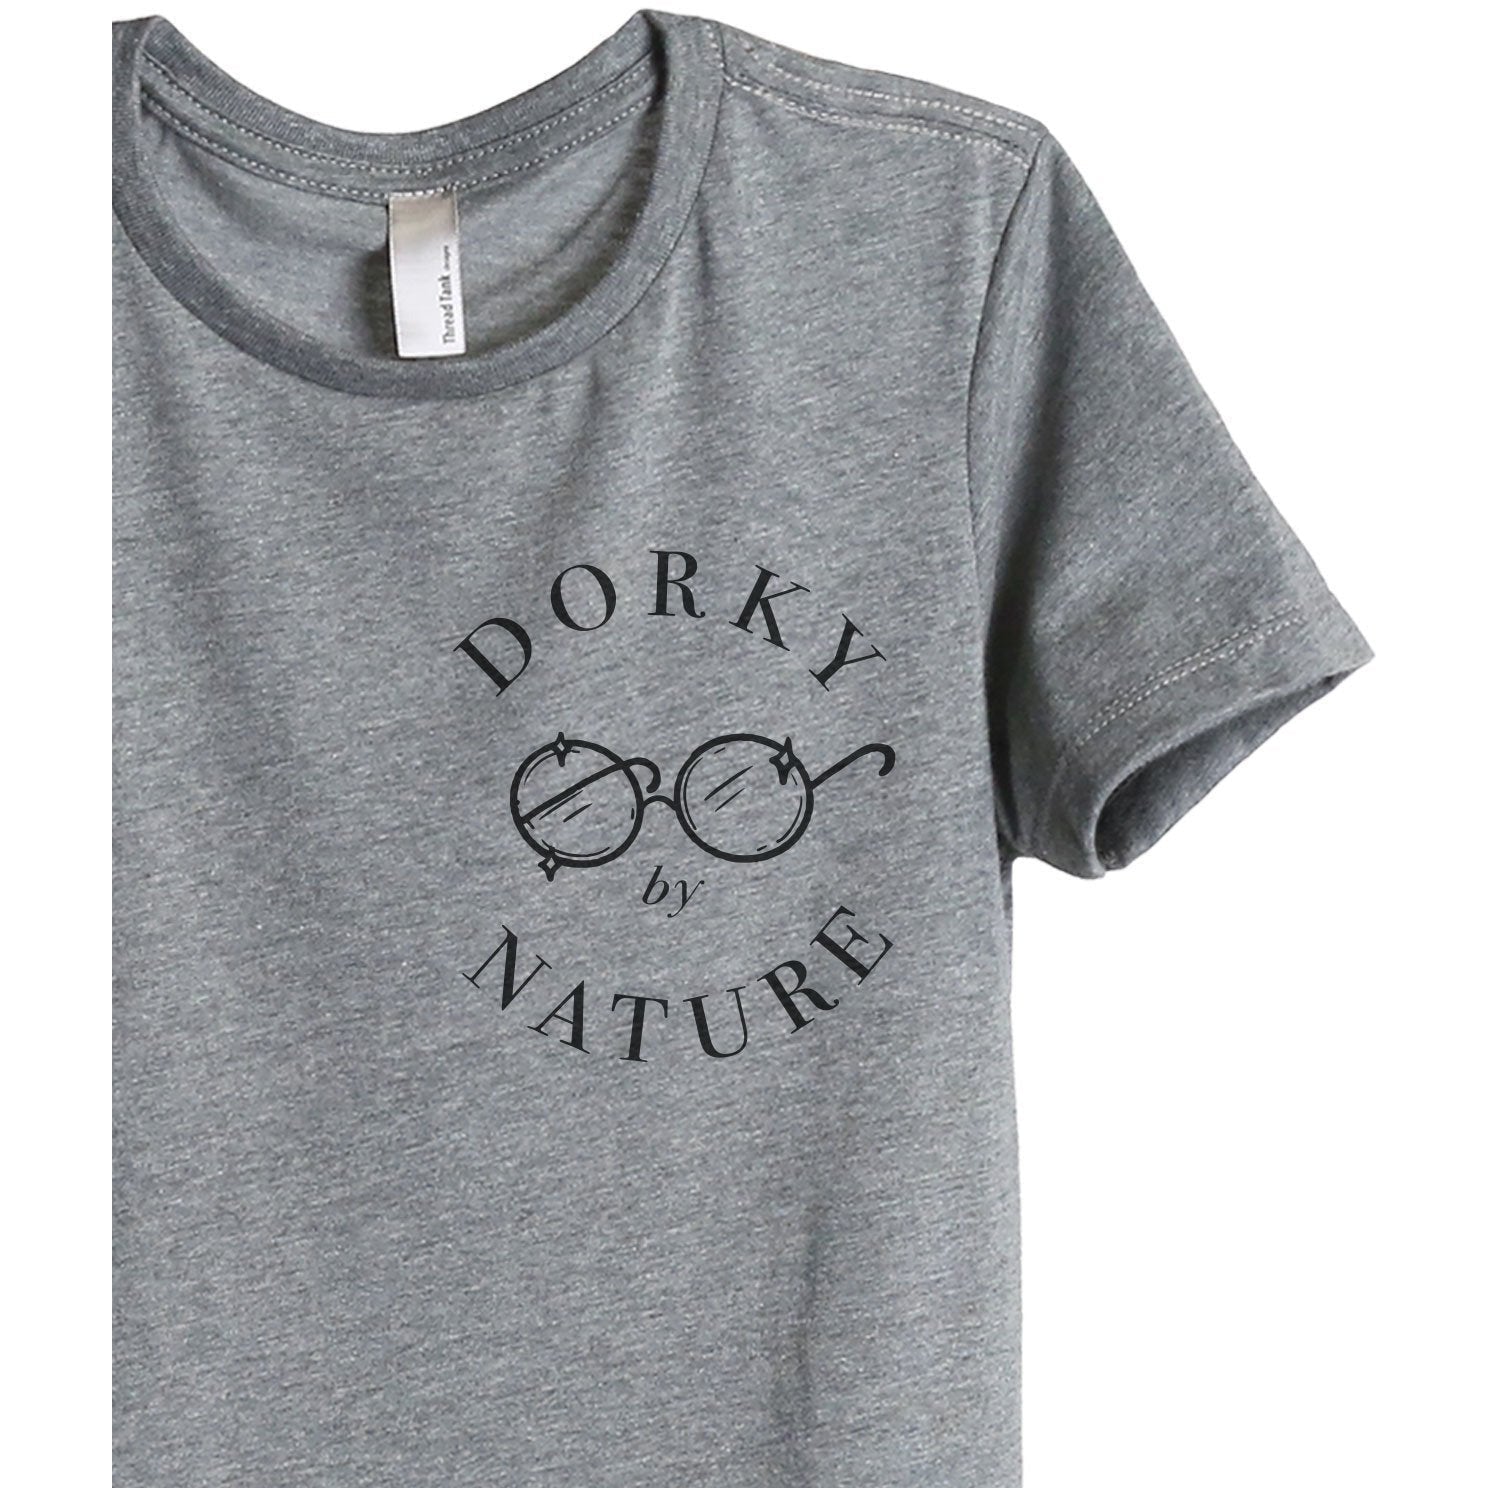 Dorky By Nature Women's Relaxed Crewneck T-Shirt Top Tee Heather Grey Zoom Details
